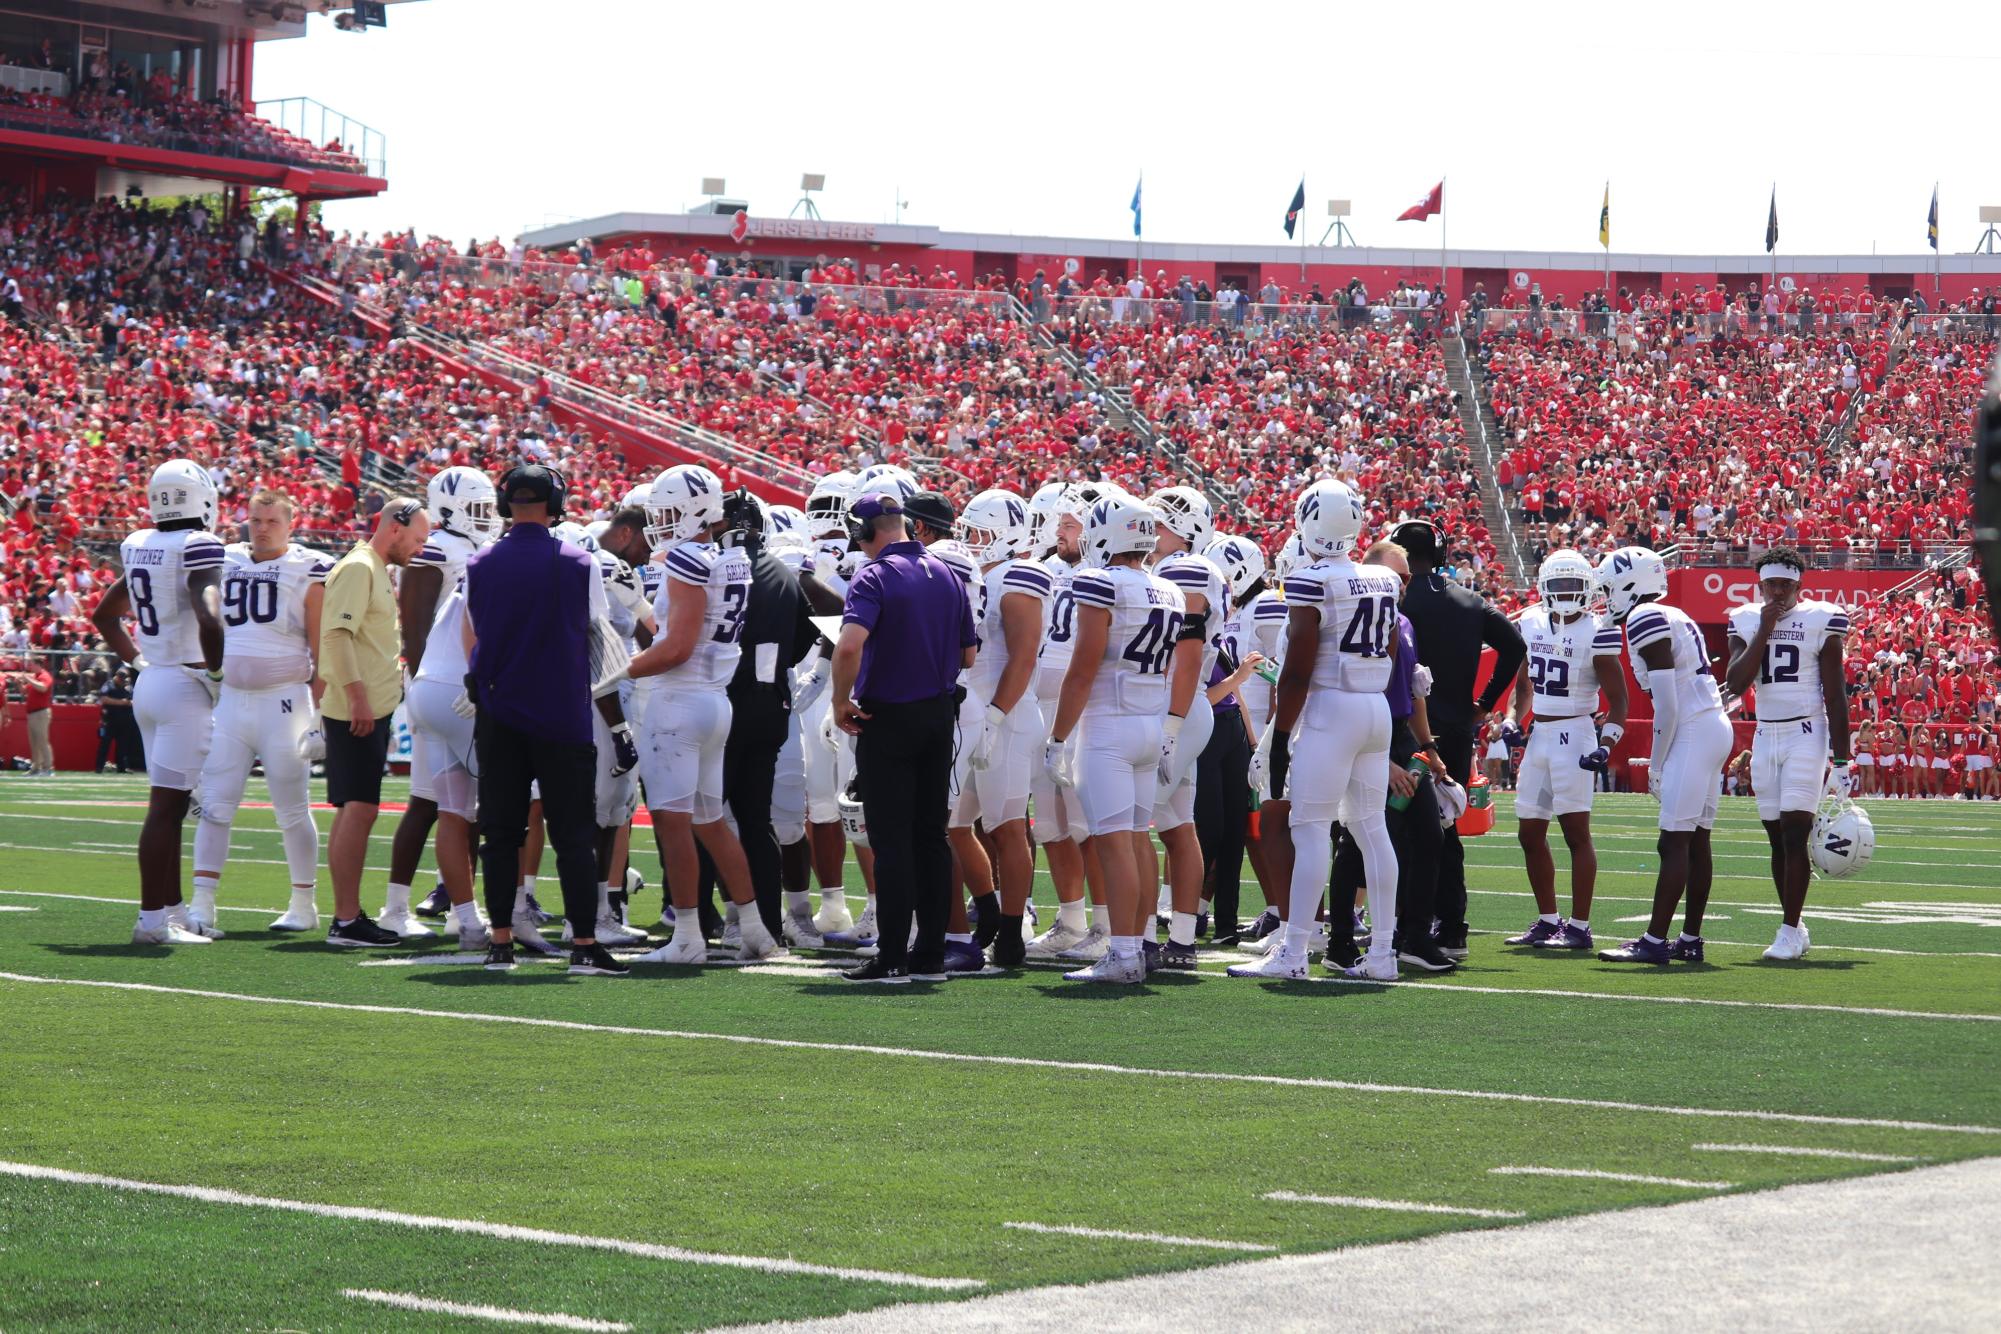 Northwestern’s team huddles together during a pause against Rutgers. The Wildcats host Minnesota under the lights at Ryan Field on Saturday night in NU’s Big Ten home opener.